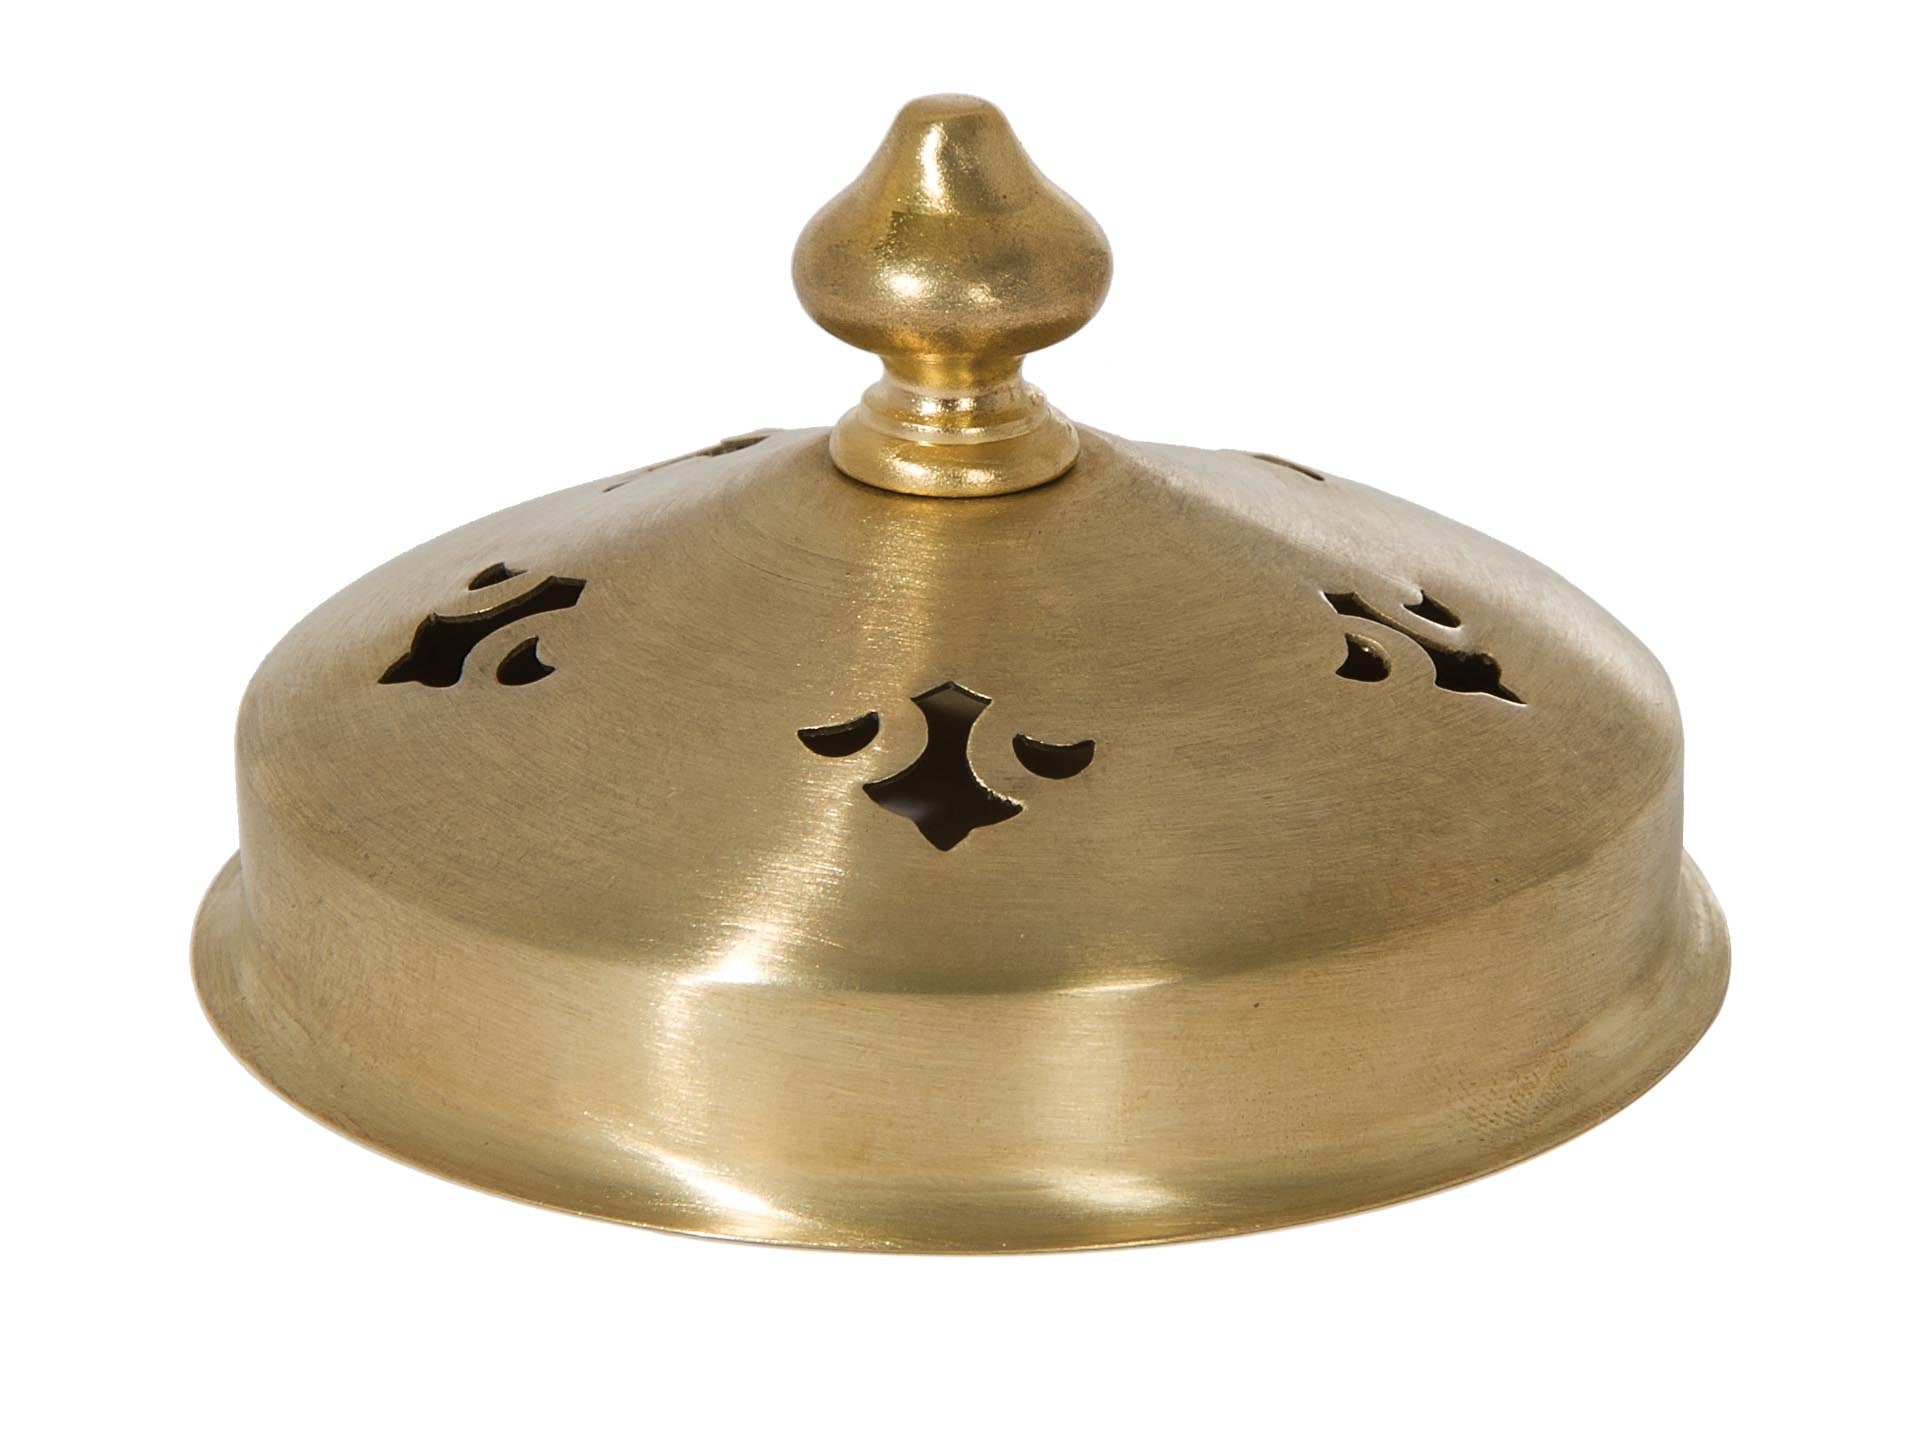 3.93" O.D. Handel Style Brass Heat Cap With Finial, Unfinished